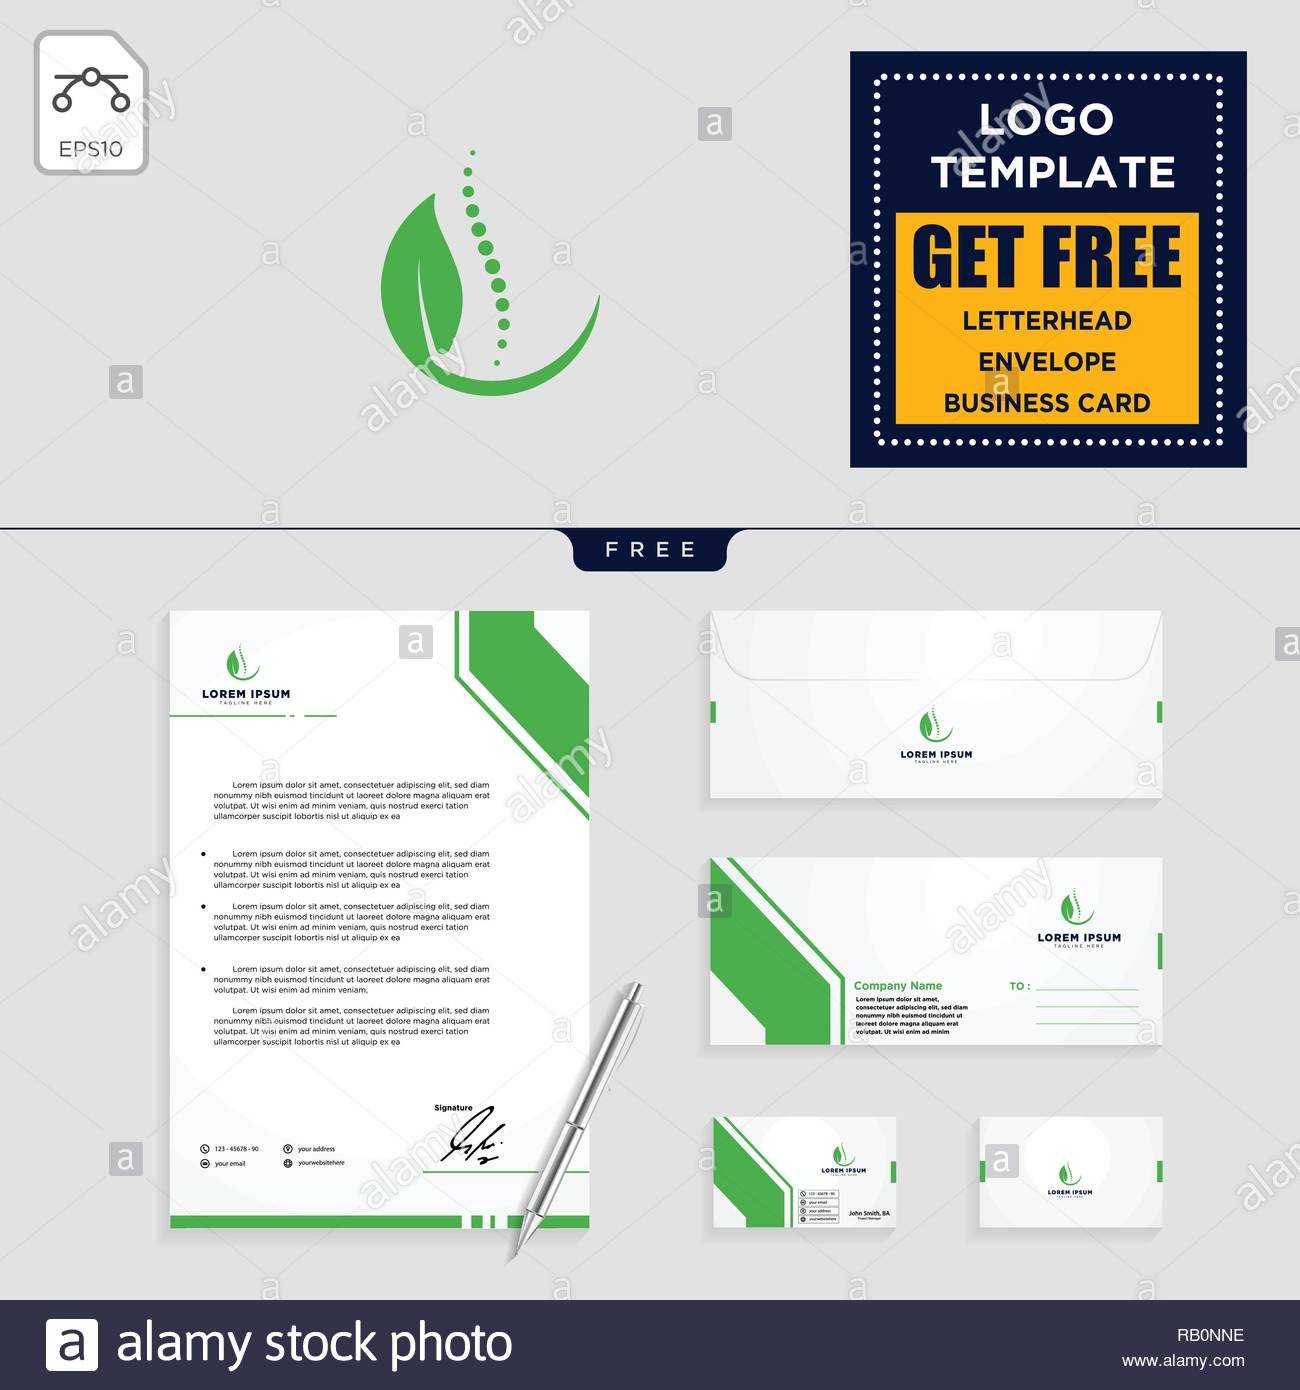 Chiropractic Leaf Logo Template Vector Illustration And For Business Card Letterhead Envelope Template